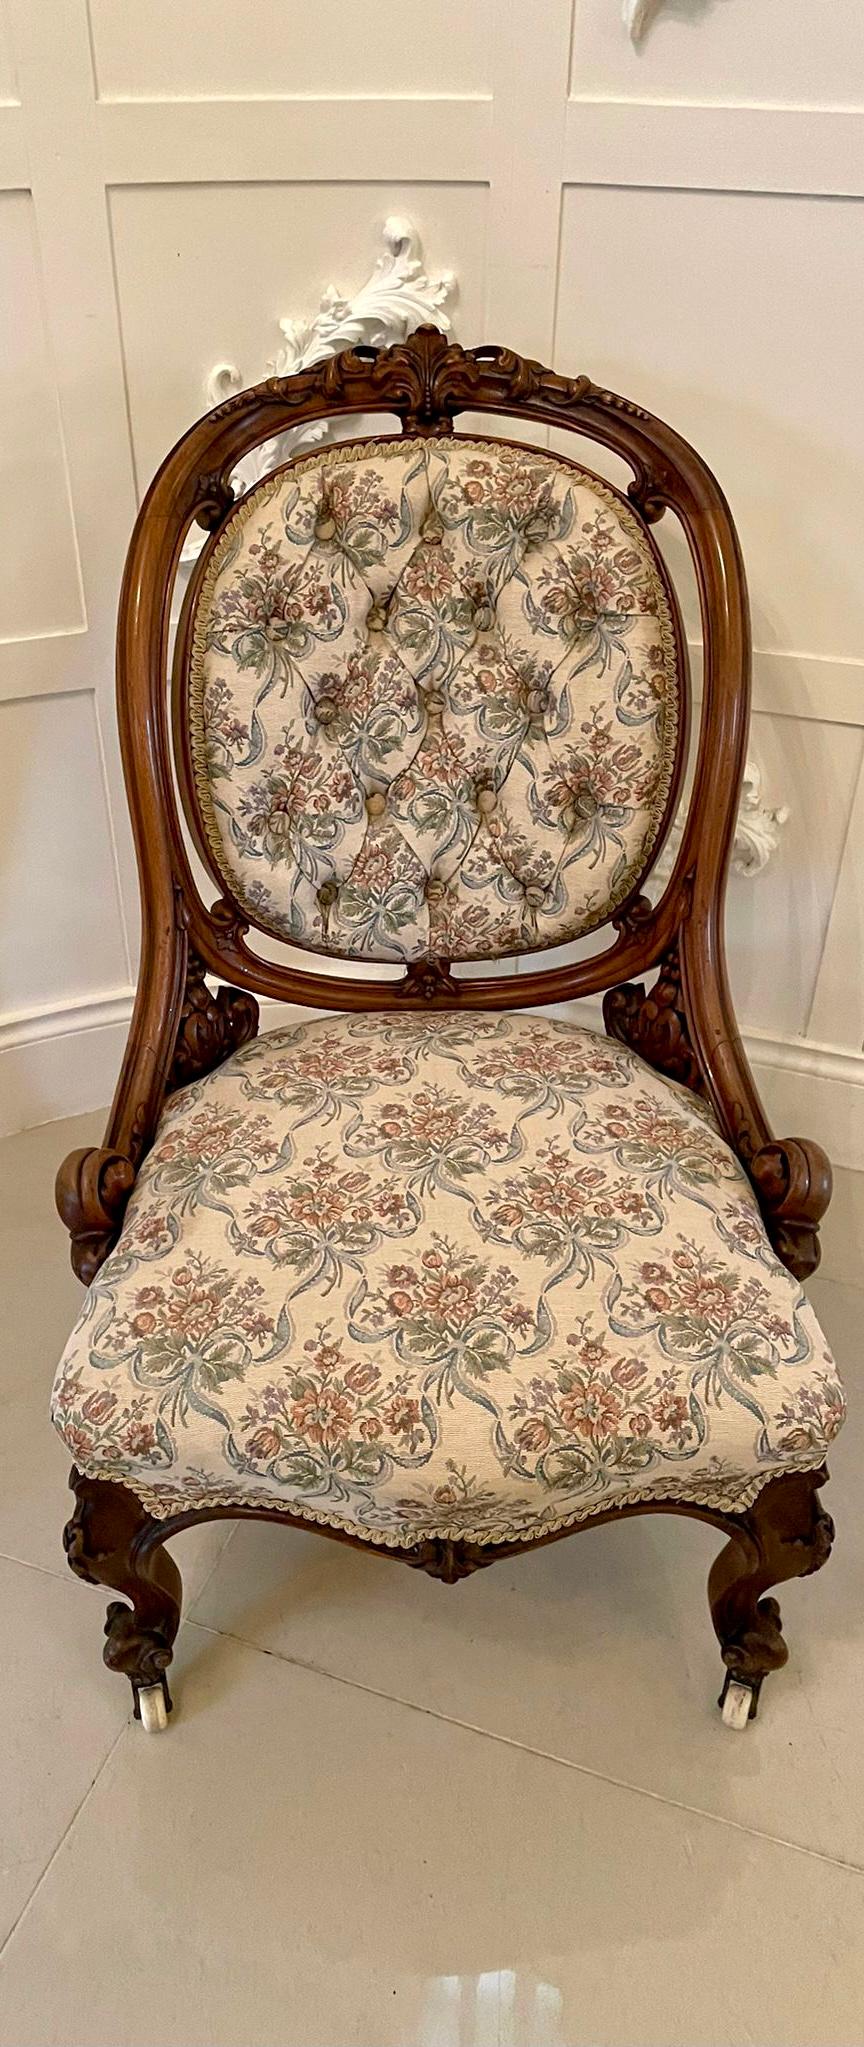 19th Century Outstanding Quality Antique Victorian Carved Walnut Chair For Sale